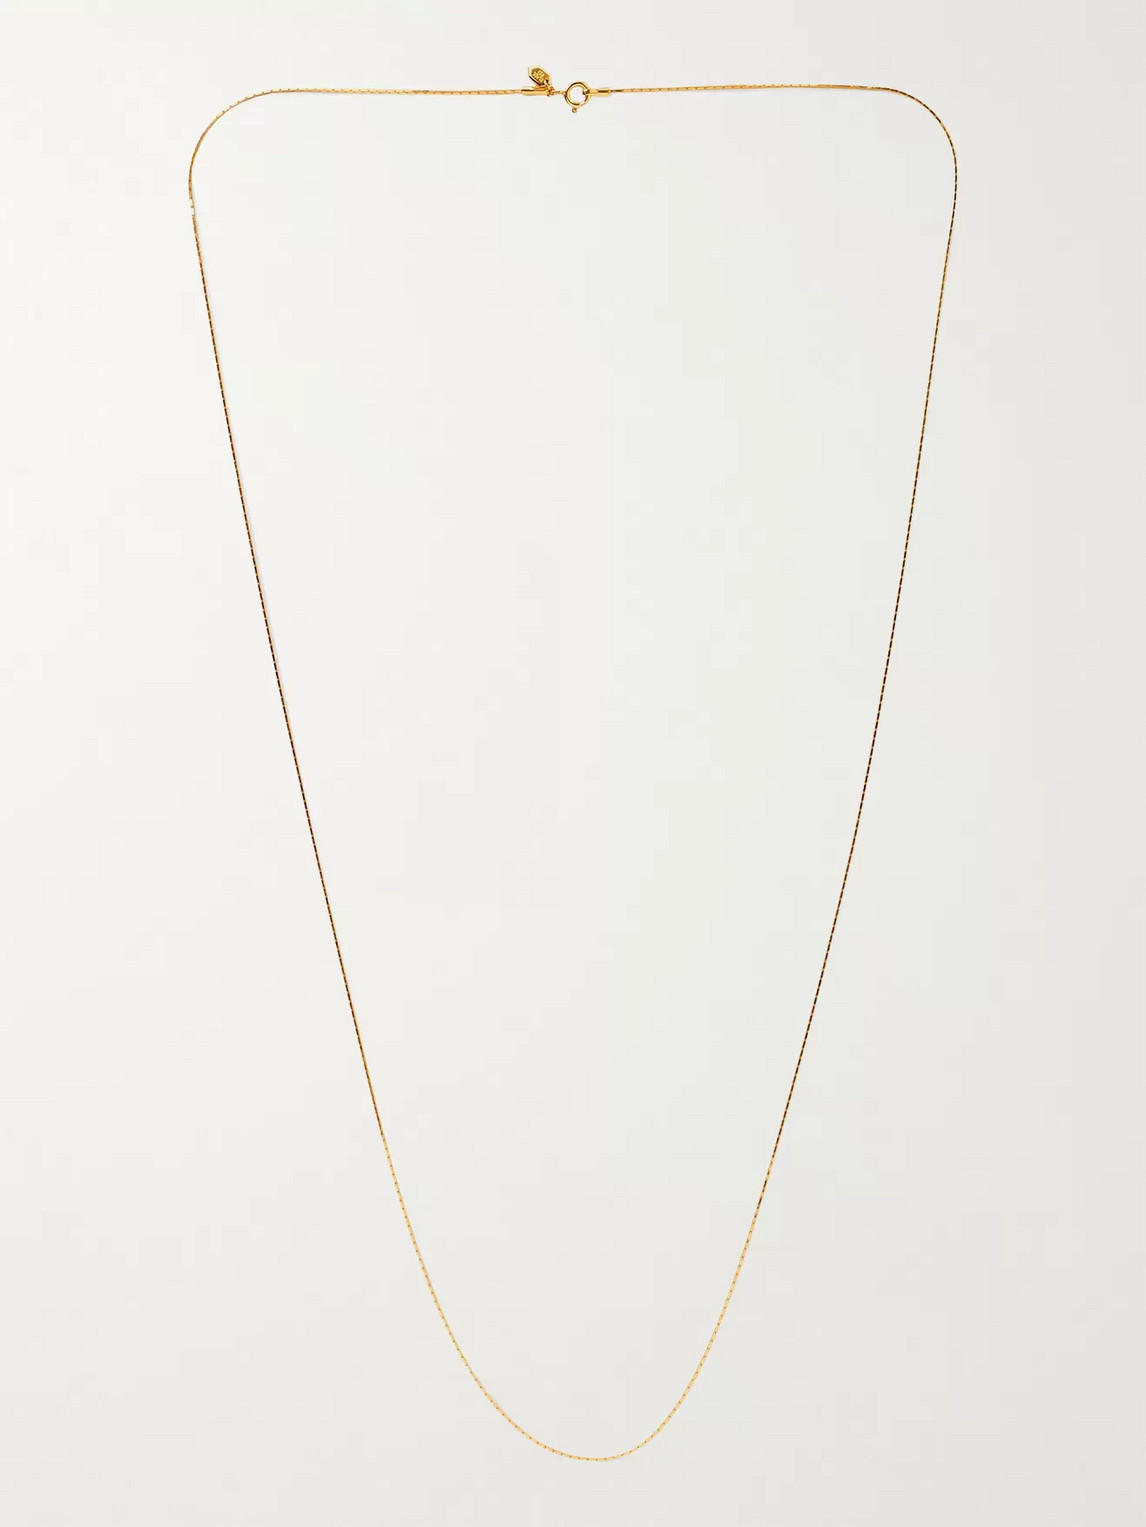 MARIA BLACK LIZ GOLD-PLATED NECKLACE